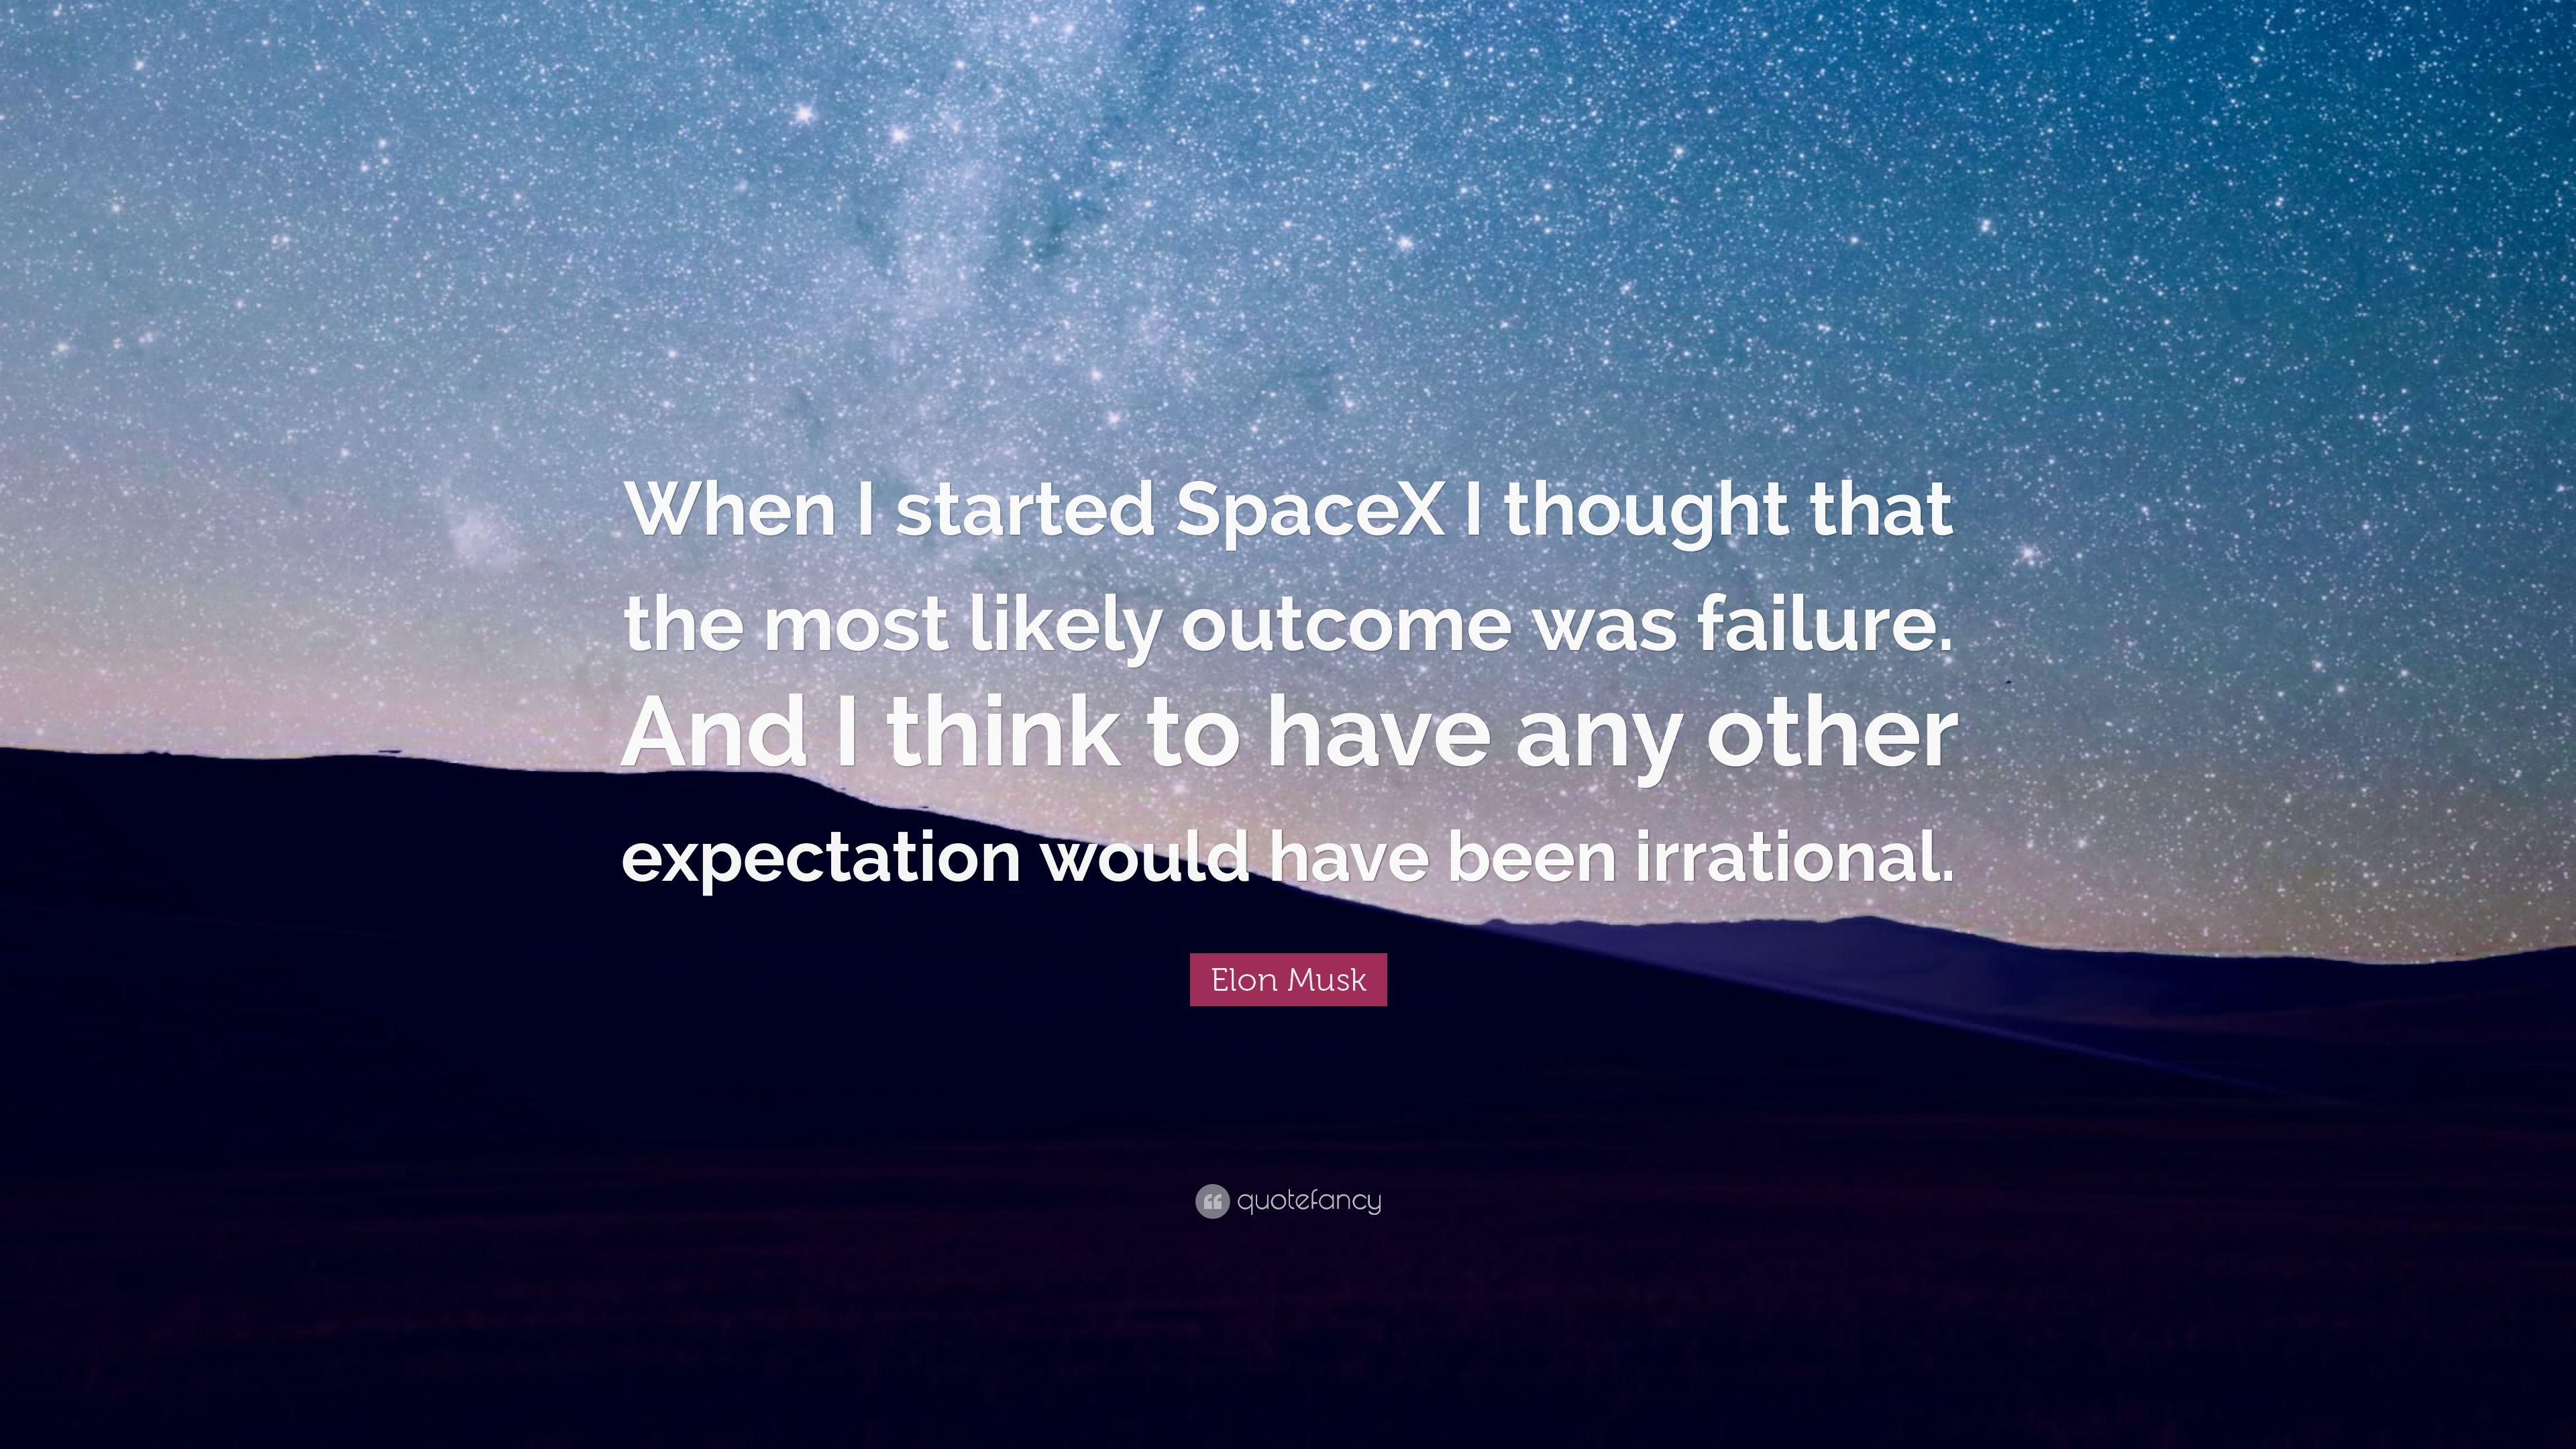 Elon Musk Quote: “When I started SpaceX I thought that the most